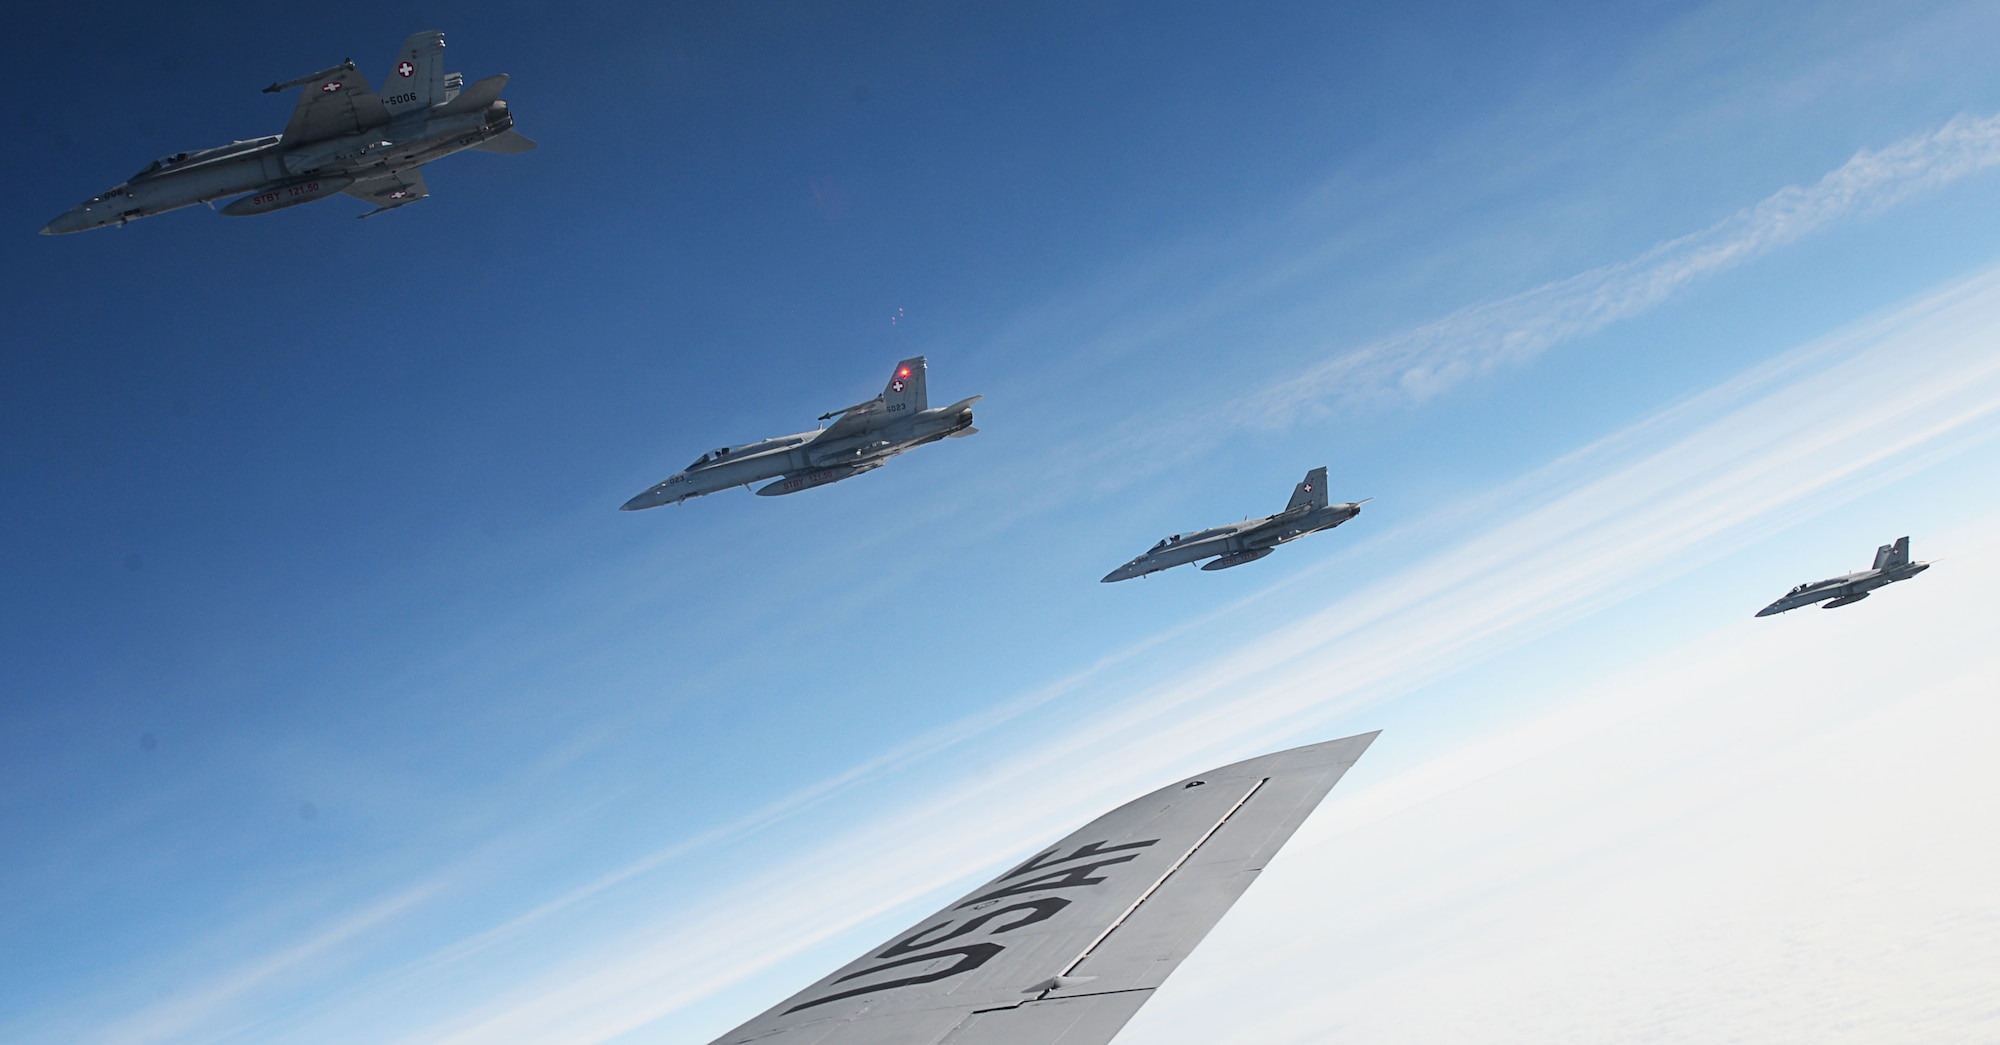 Four Swiss F-18 Hornets fly alongside a U.S. Air Force KC-135 Stratotanker, assigned to the 100th Air Refueling Wing RAF Mildenhall, England, after receiving fuel over Germany Oct. 20, 2017. The 100th ARW theatre of operations covers Europe and Africa, supporting NATO and other nation missions. (U.S. Air Force photo by Senior Airman Justine Rho)